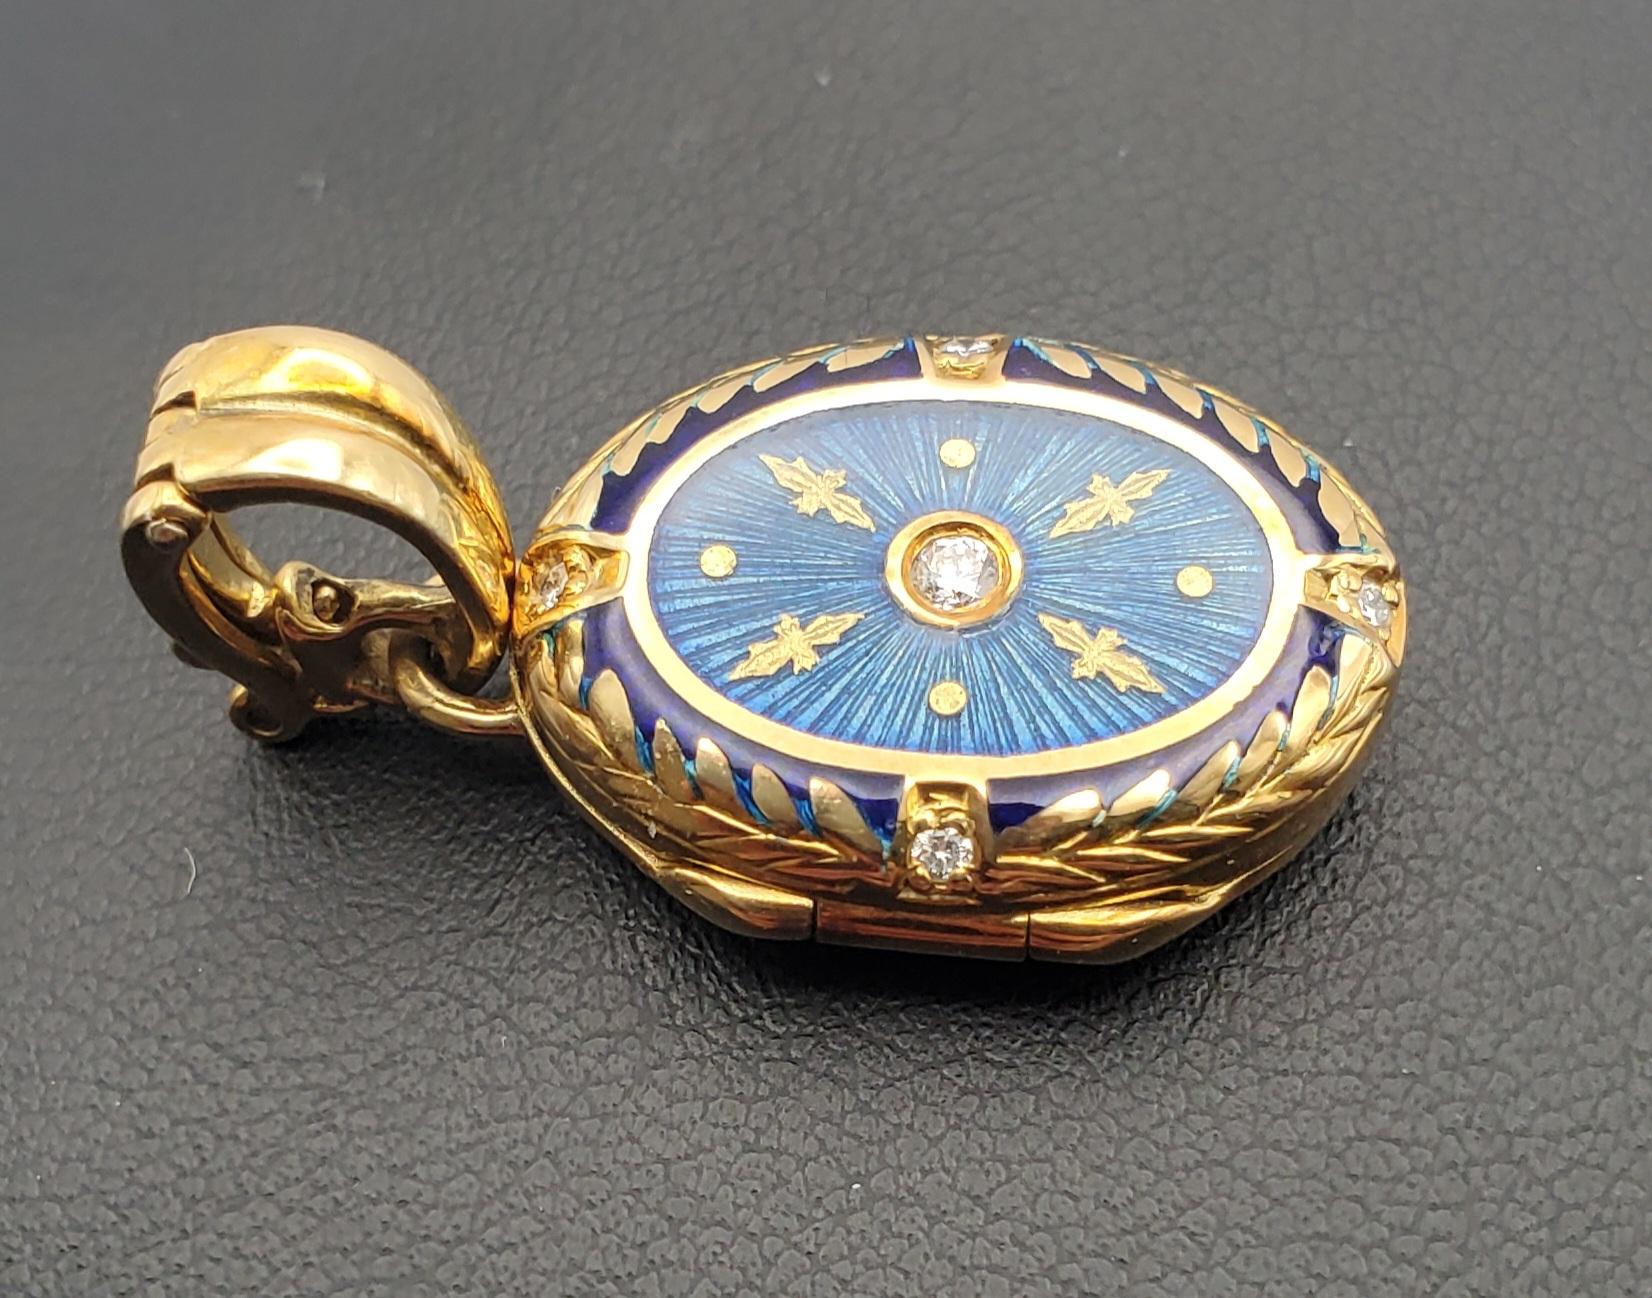 Fabergé 18K Gold Diamond Guilloche Enamel Locket with Box/Certificate In Good Condition For Sale In Pittsburgh, PA